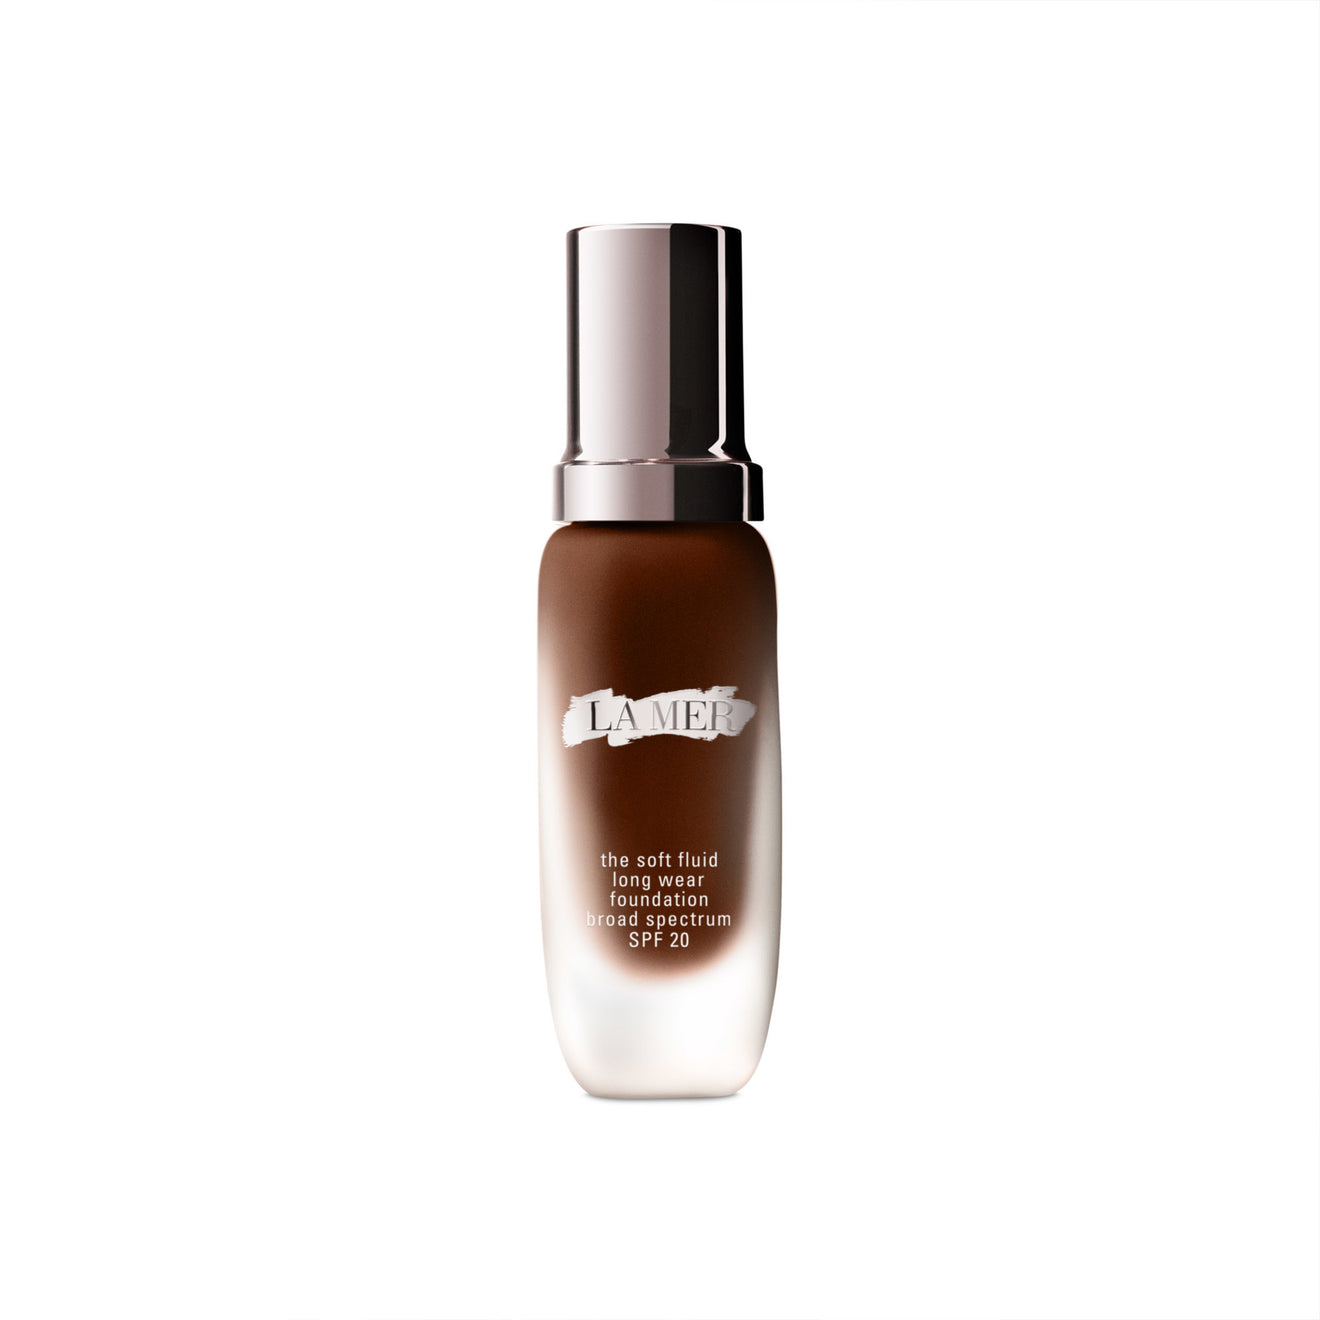 La Mer The Soft Fluid Long Wear Foundation SPF 20 Color/Shade variant: 410 Espresso - Deep Skin with Cool Undertone main image. This product is for deep complexions